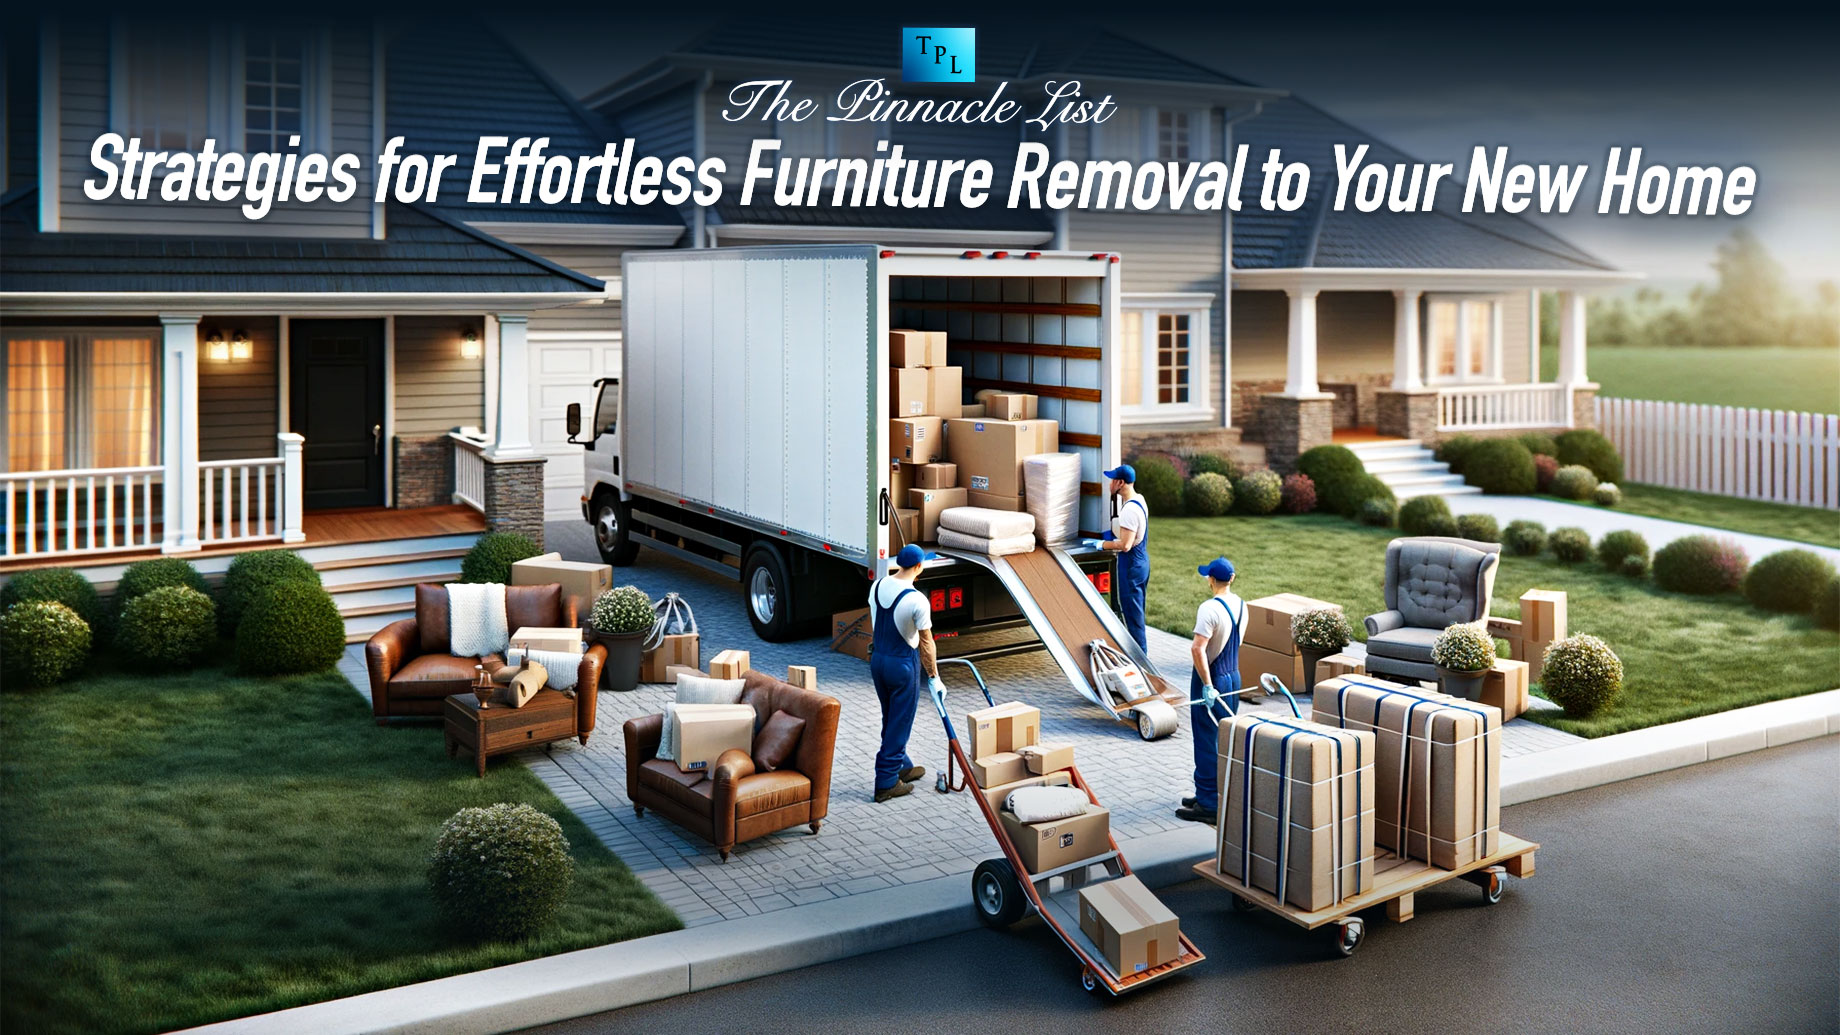 Strategies for Effortless Furniture Removal to Your New Home